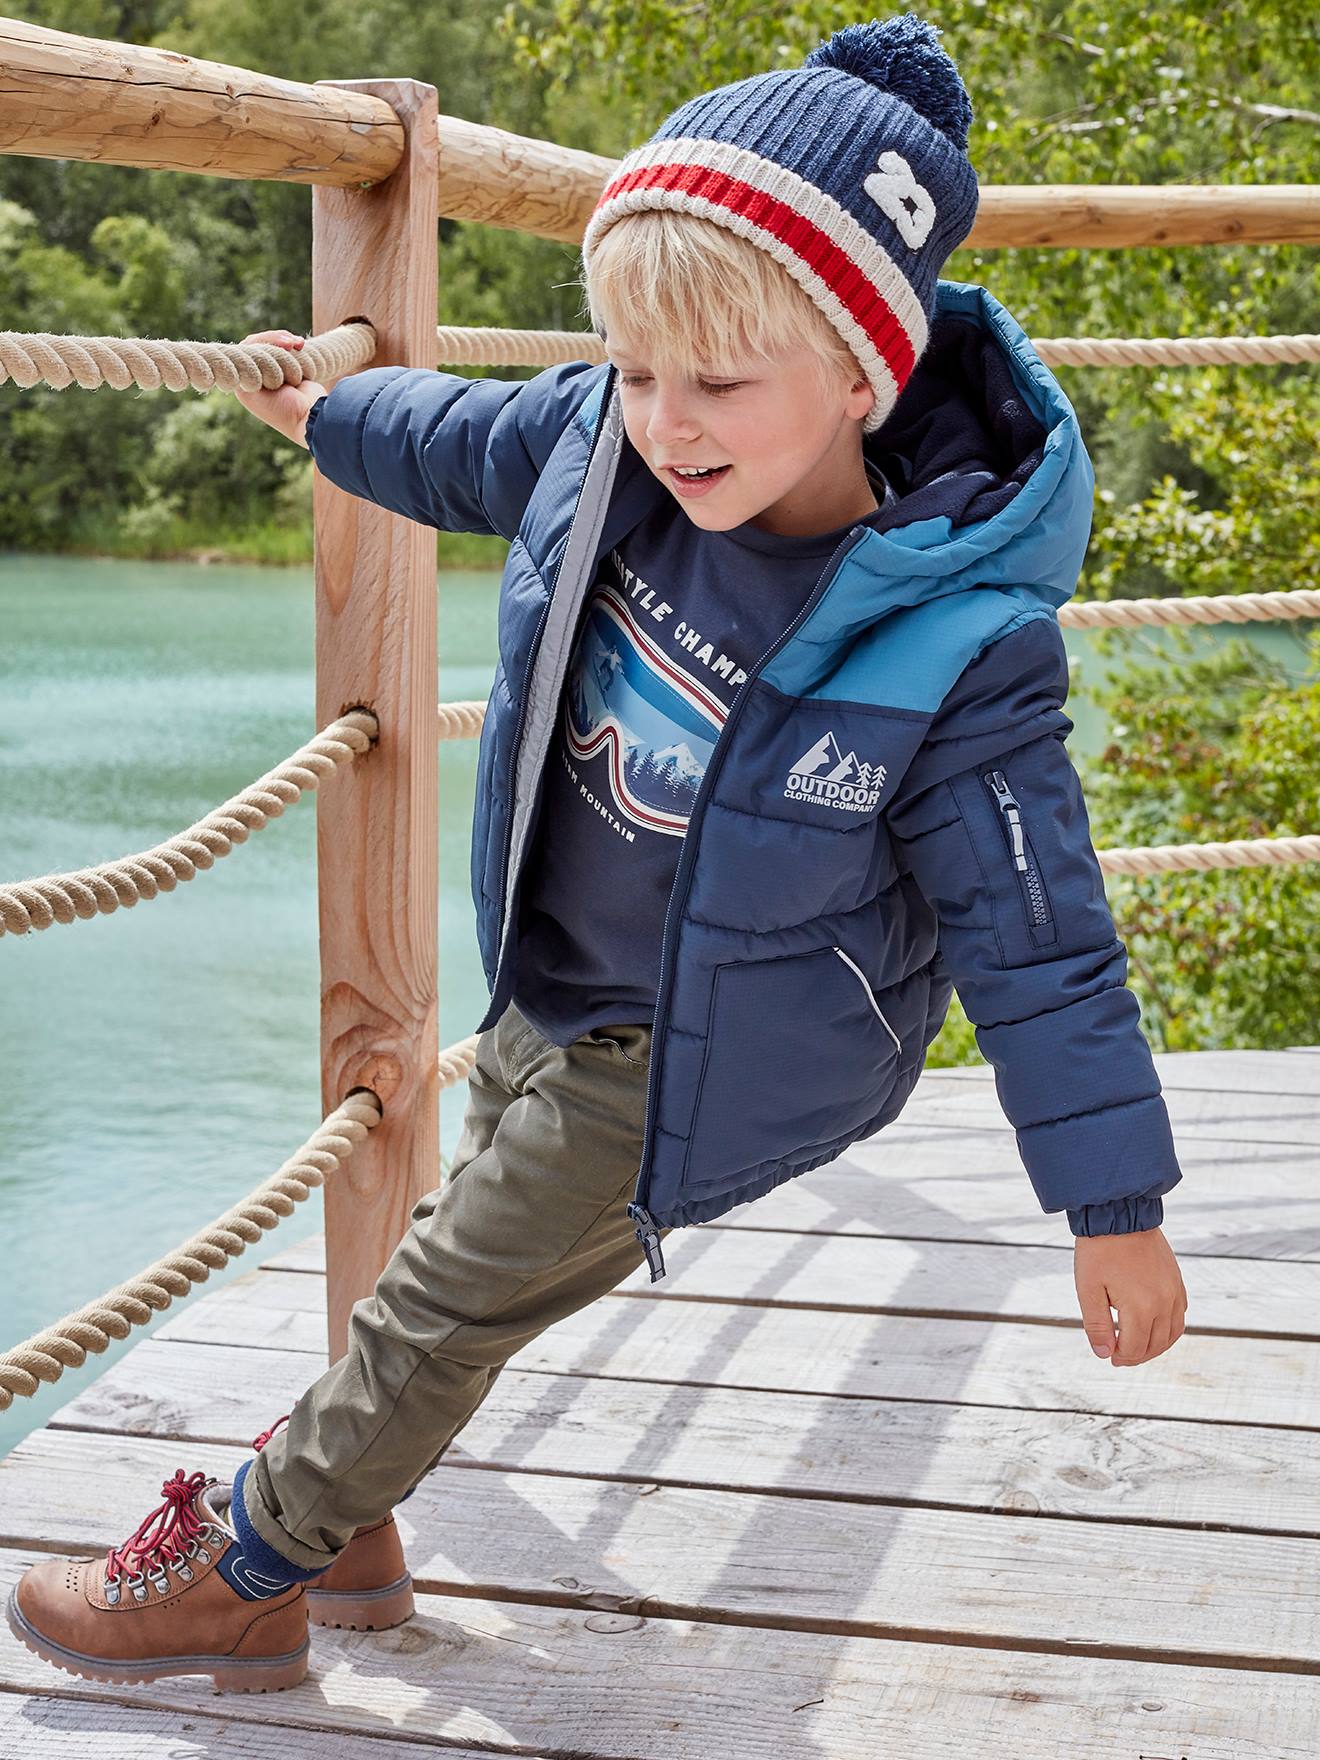 Truworths Fashion - Get a little colourful with these fun LTD Kids